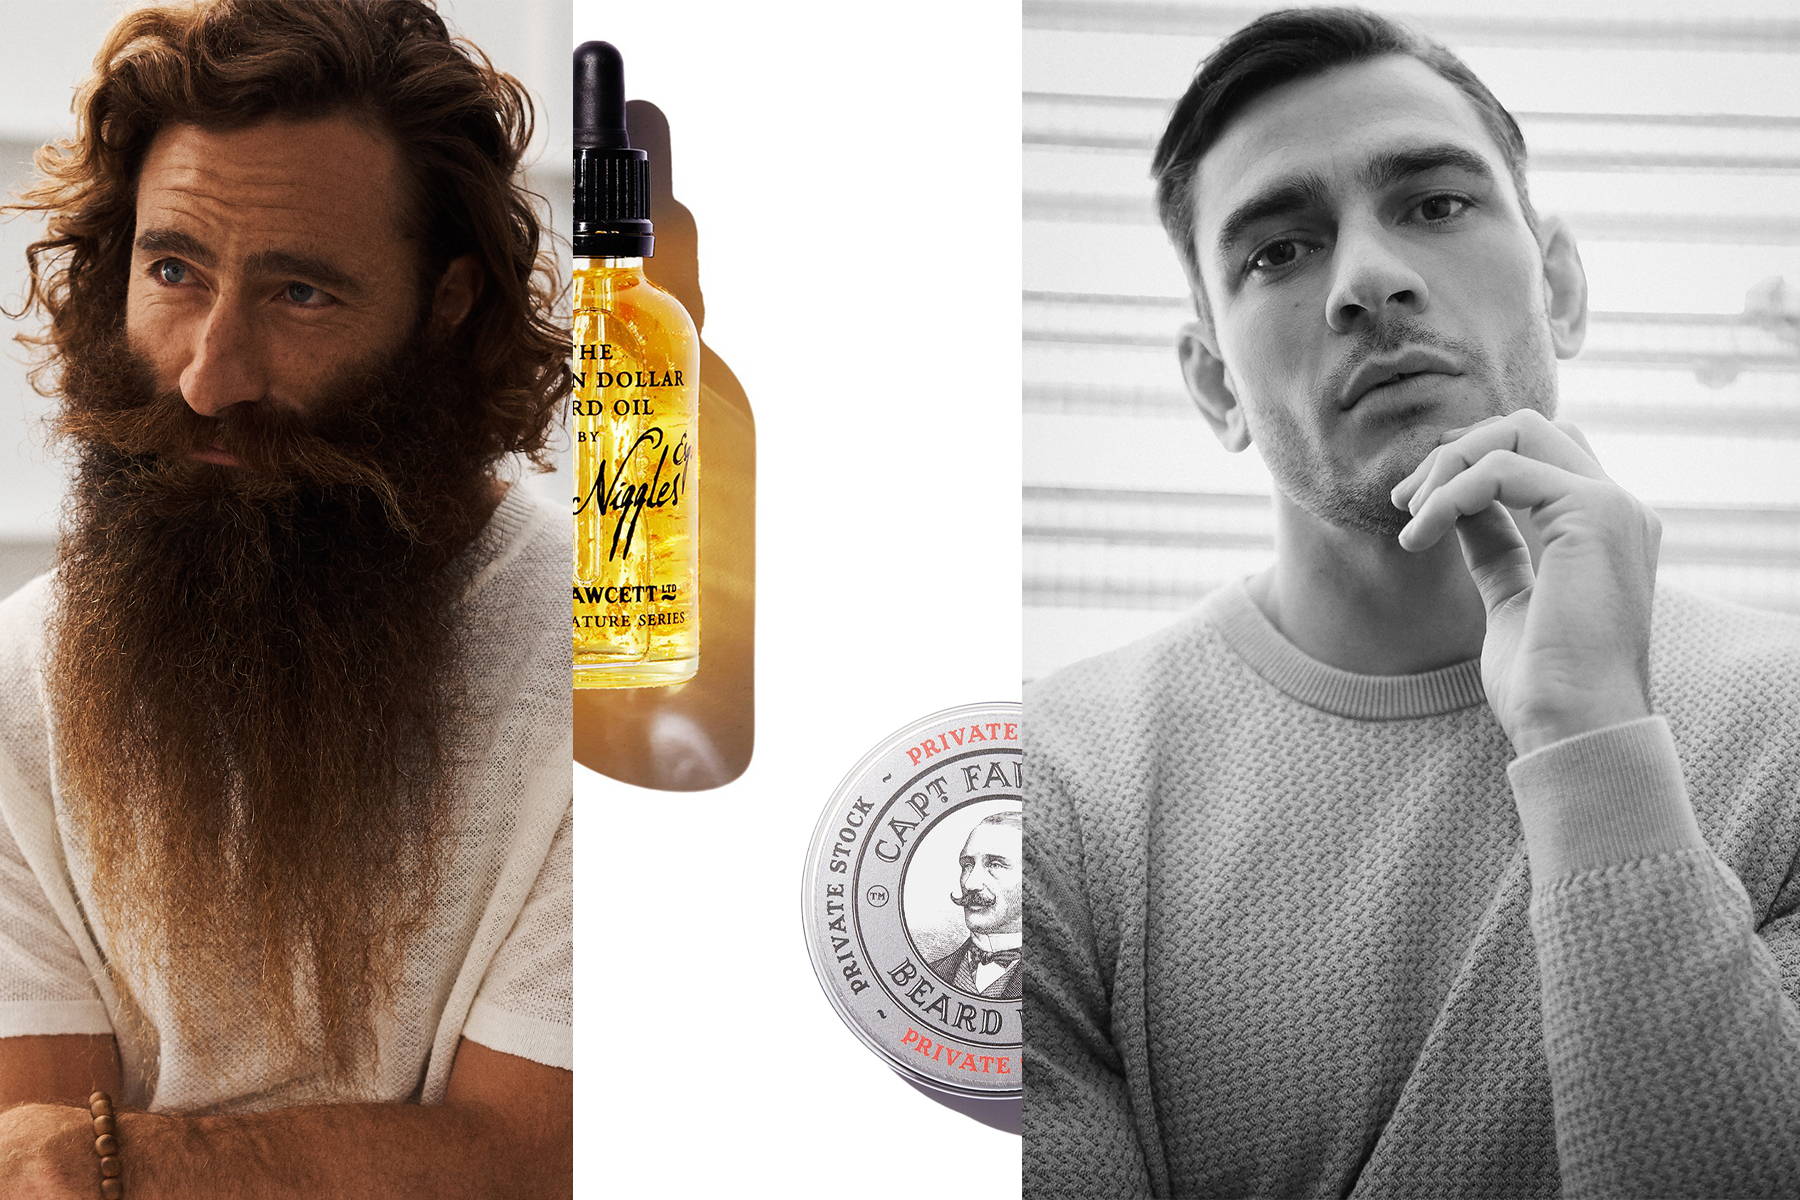 Current Beard Trends, Explained